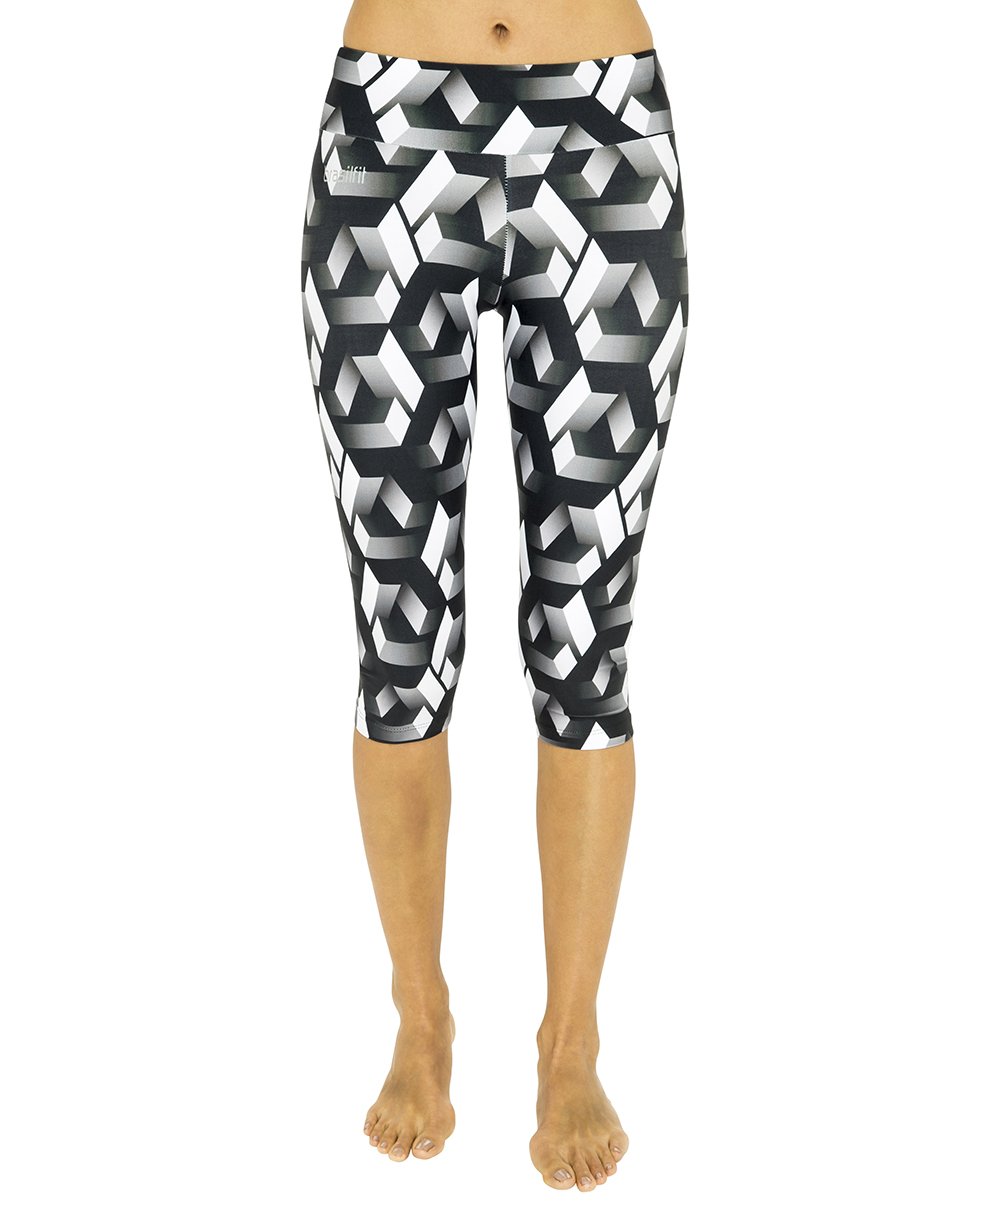 Side view product image for Brasilfit Labyrinth under knee activewear leggings.  Labyrinth leggings are part of our premium printed activewear collection that is focused on performance, high compression activewear with colourful prints.